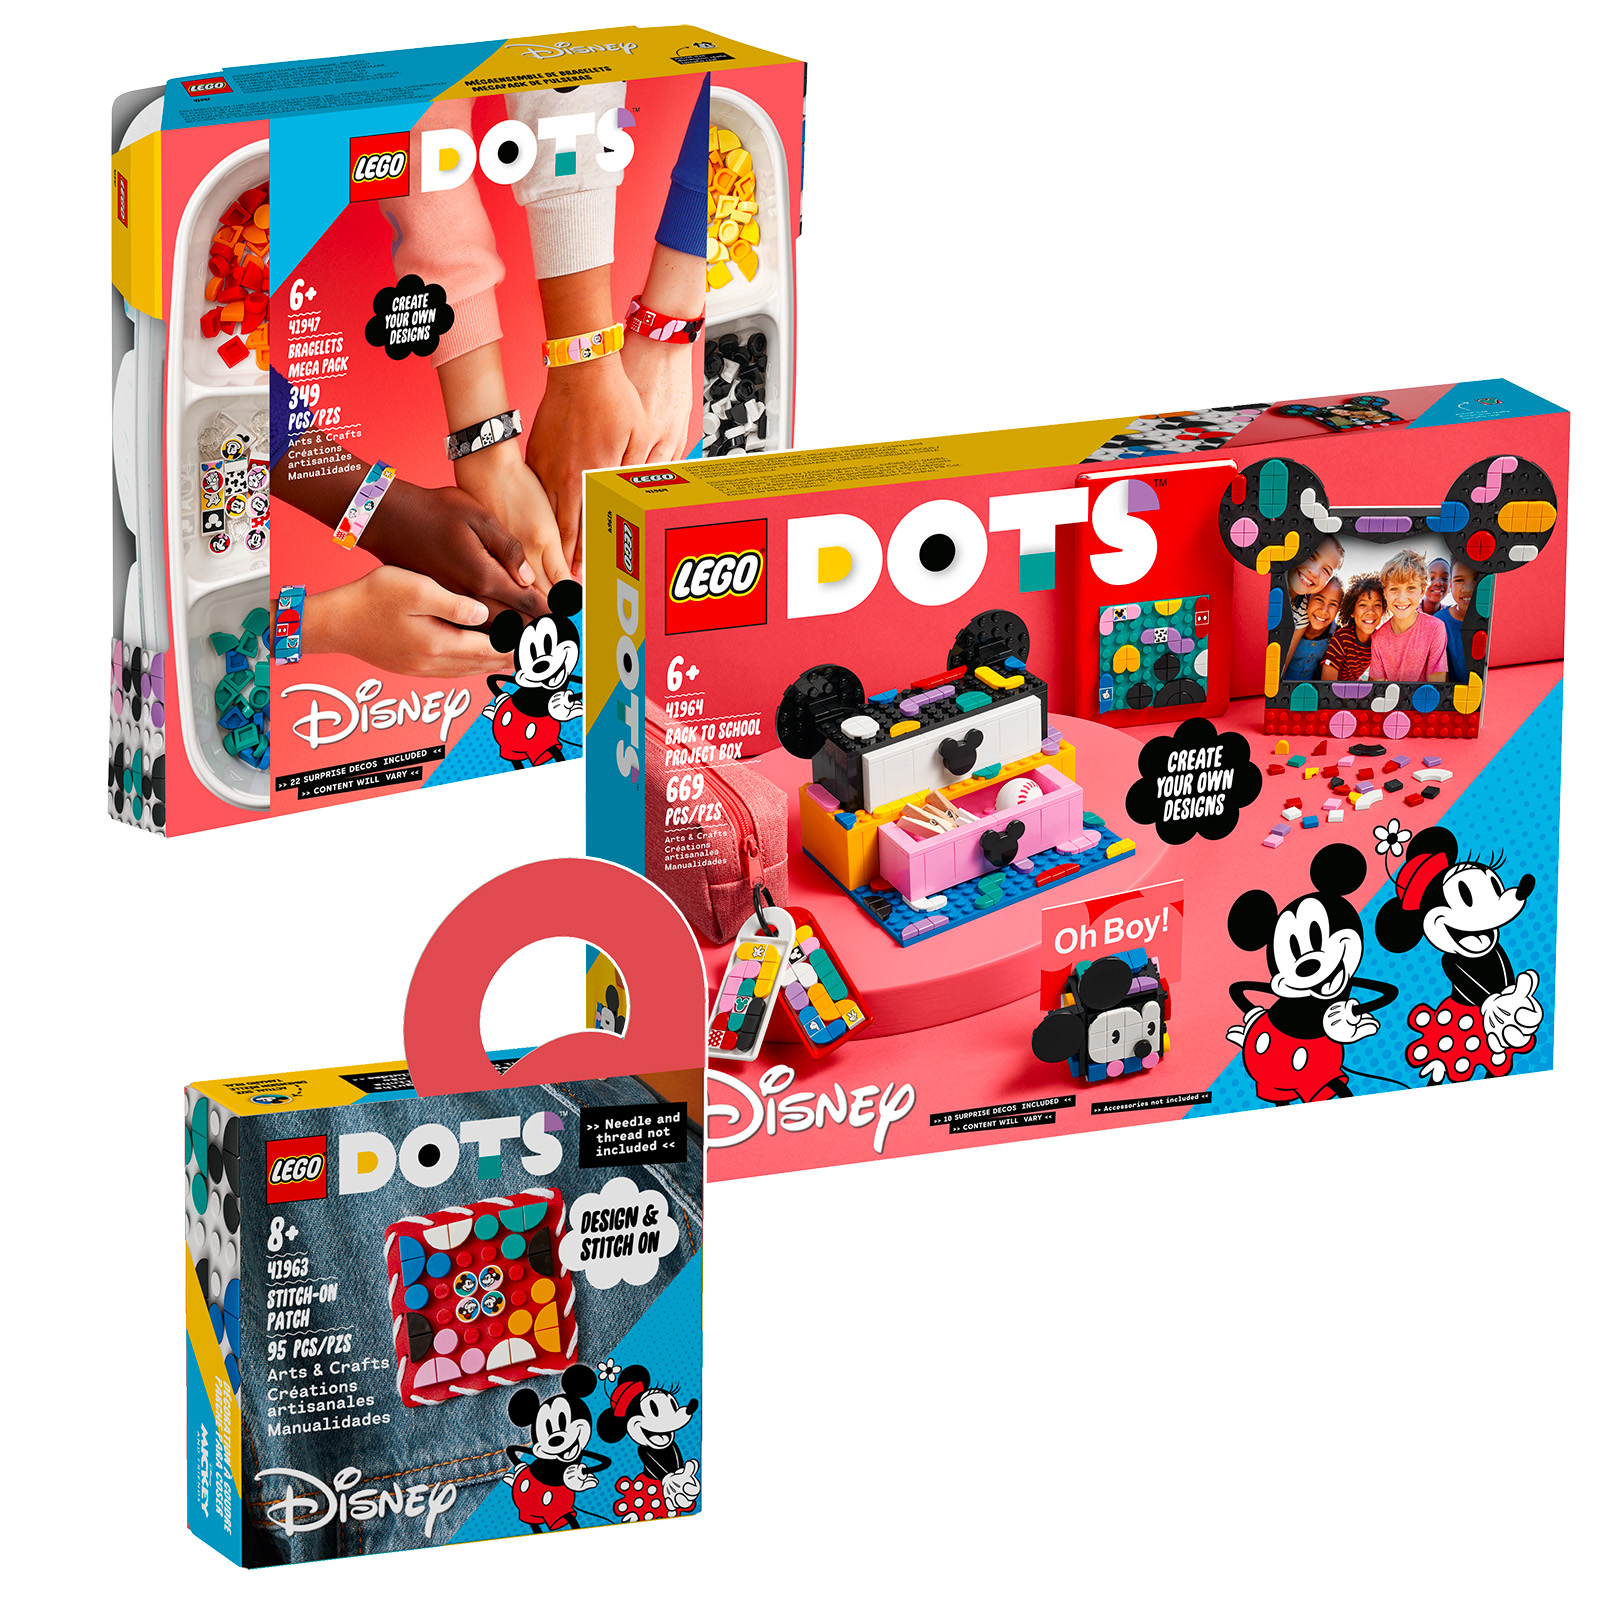 Mickey, Minnie and their friends arrive this summer in the LEGO DOTS range